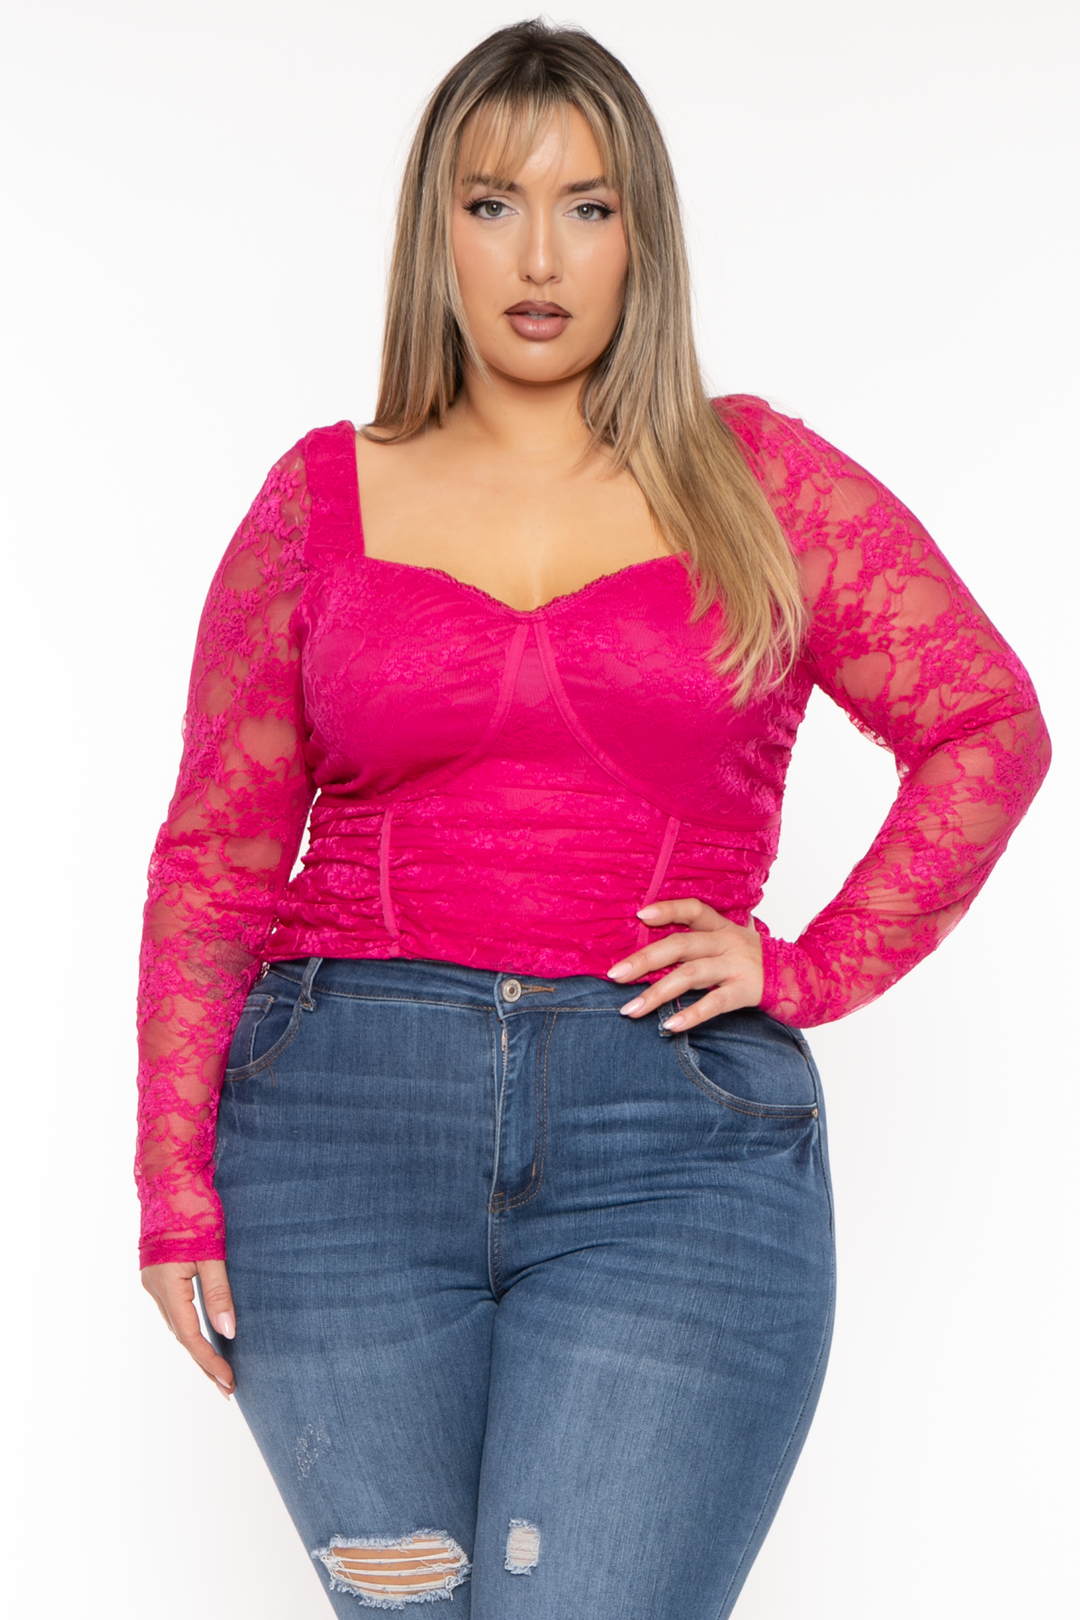 ASK SC: 6 PLACES TO SHOP FOR PLUS SIZE CROP TOPS - Stylish Curves